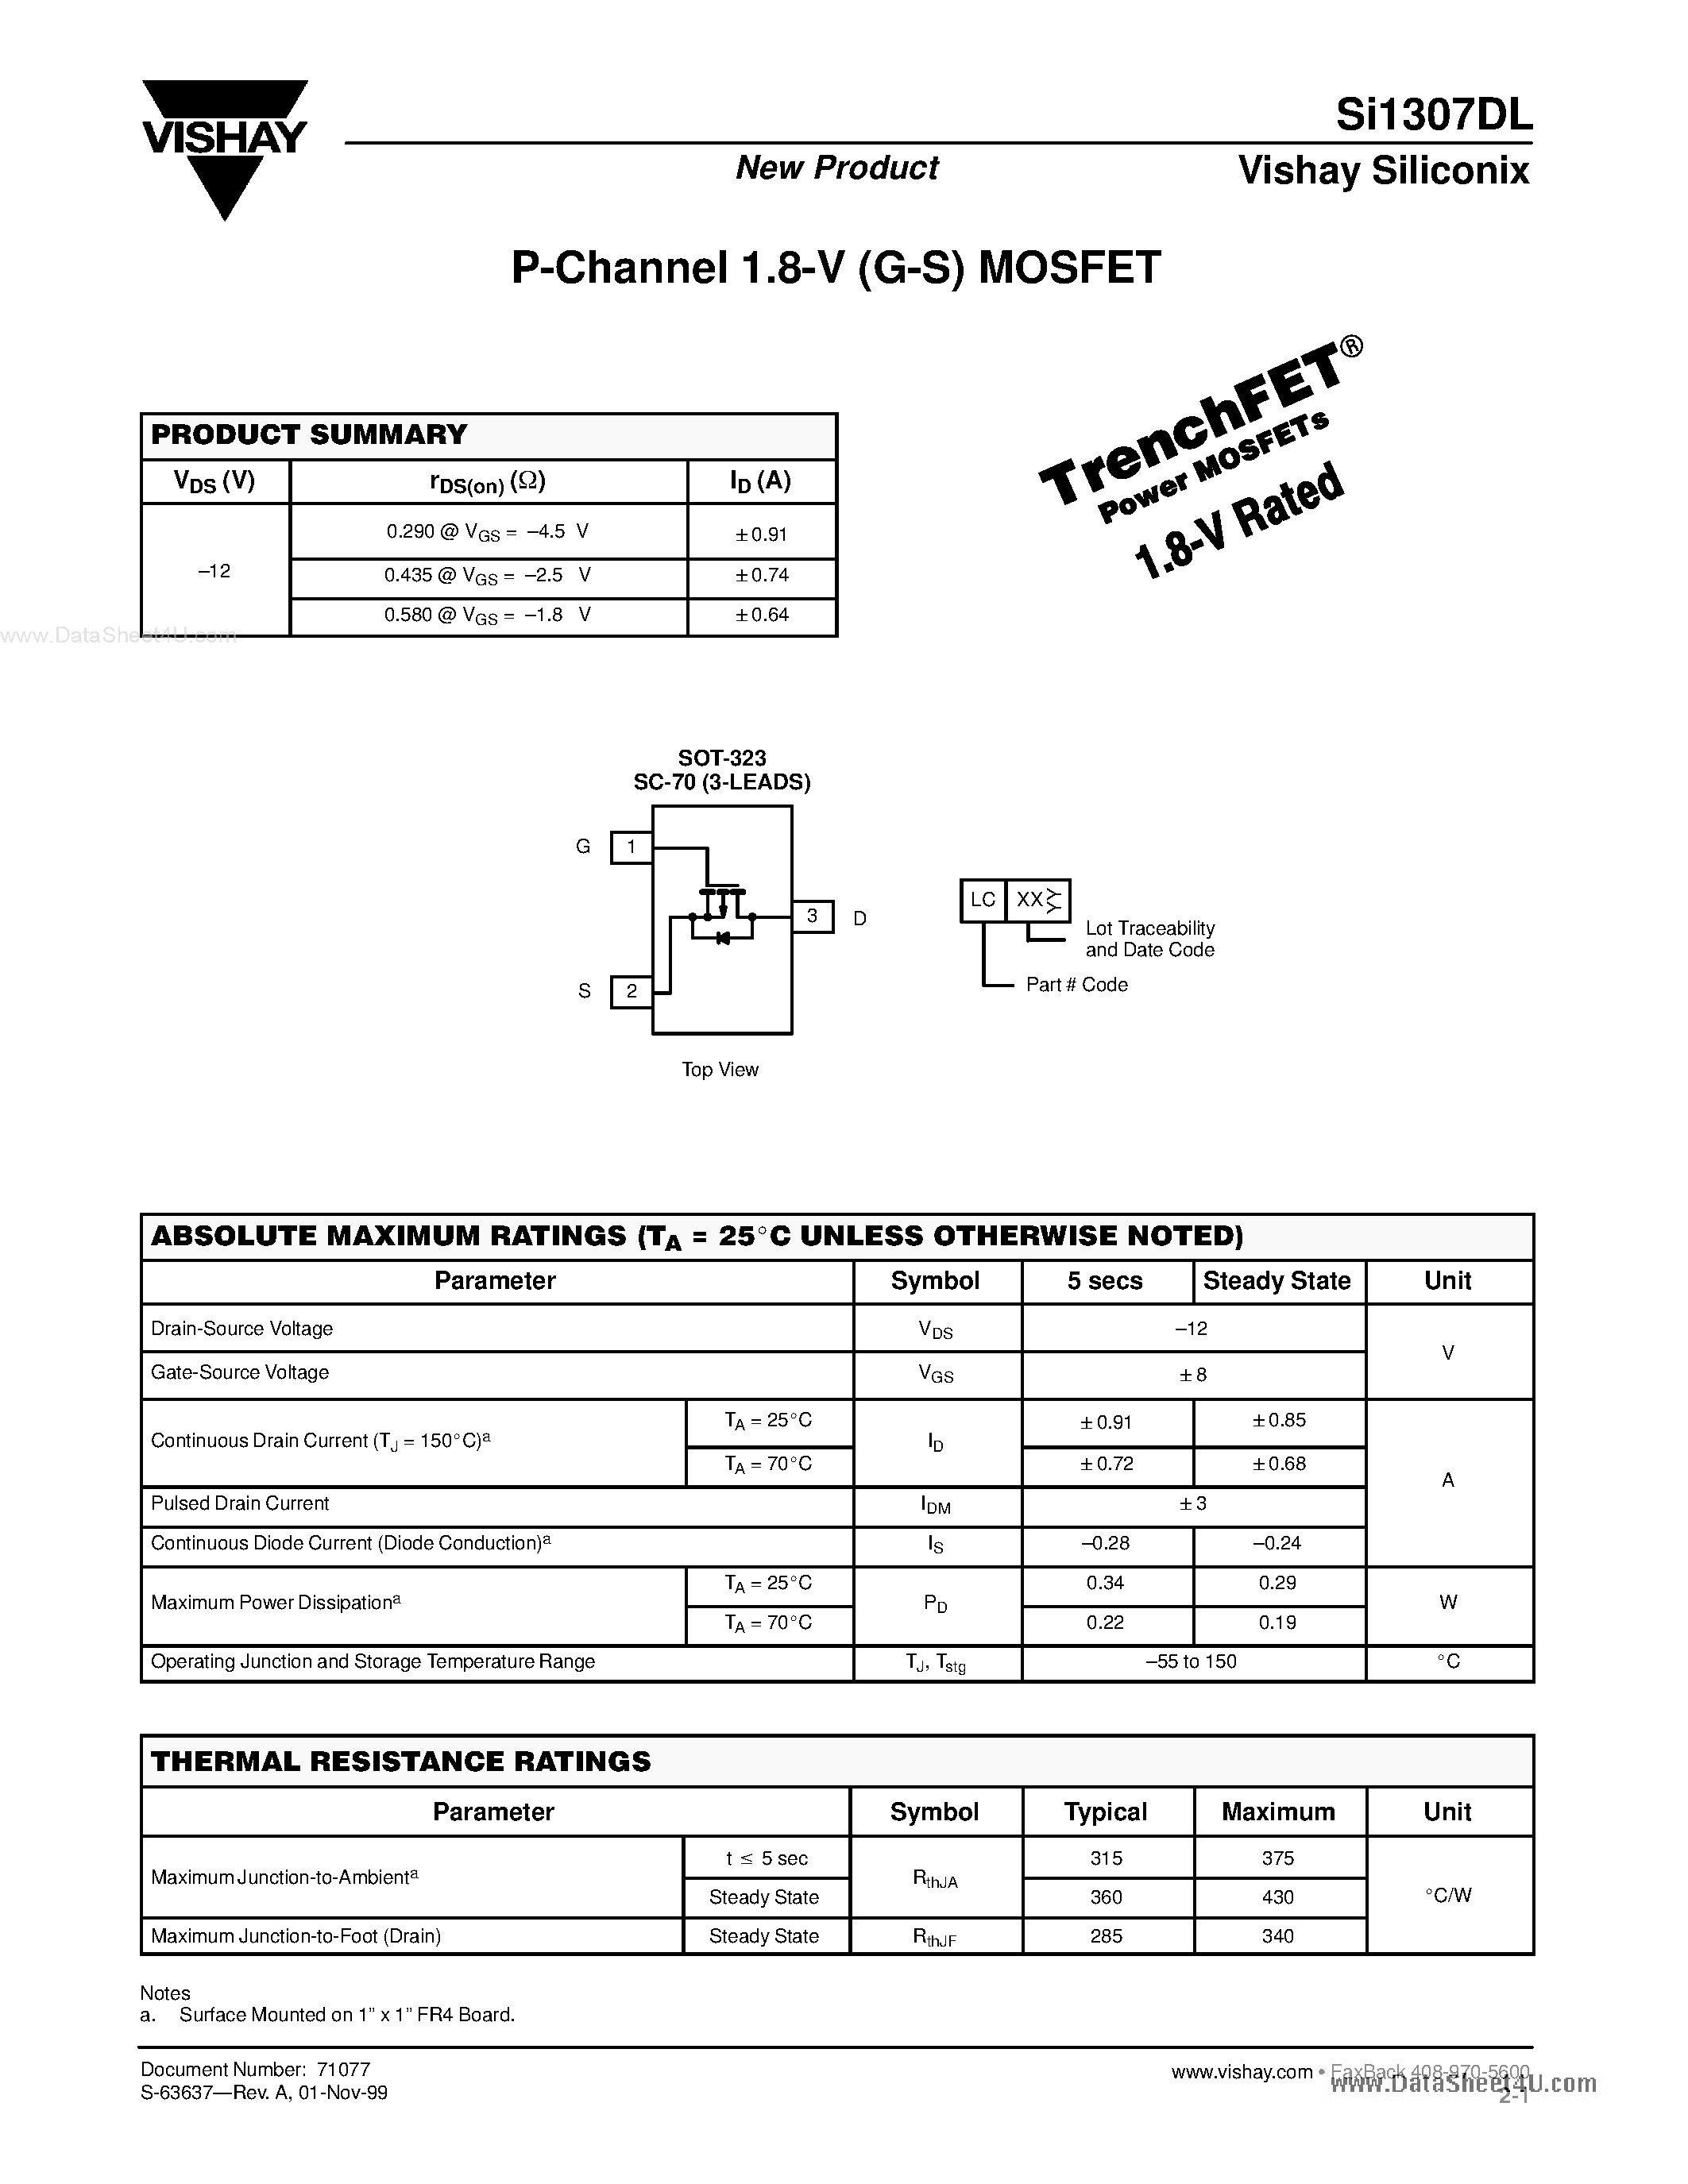 Даташит SI1307DL - P-Channel 1.8-V (G-S) MOSFET страница 1